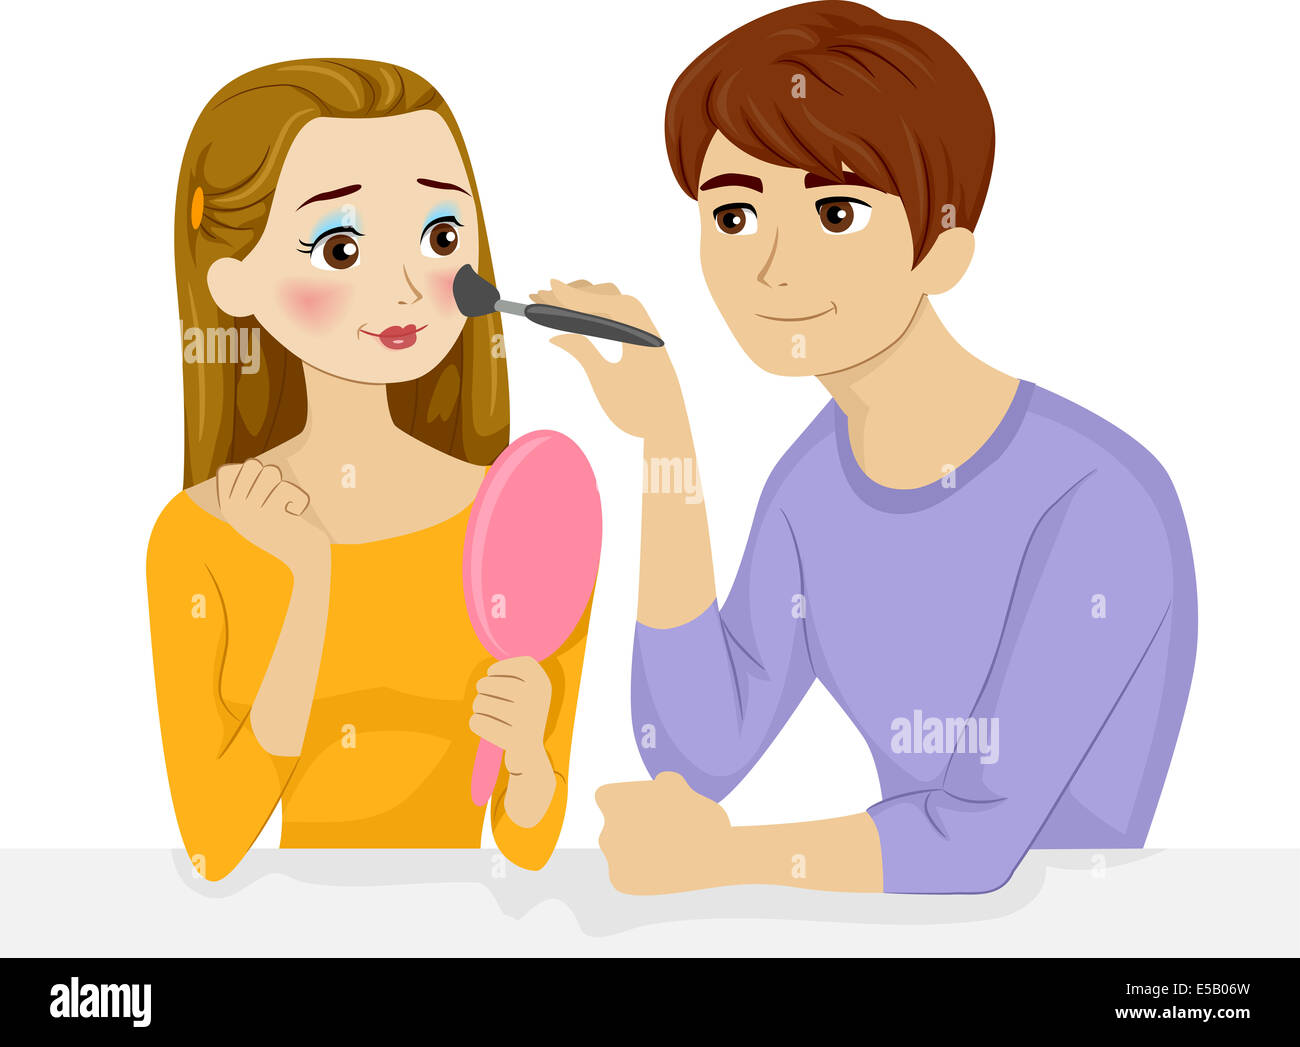 Illustration Featuring a Boyfriend Applying Make Up on His Girlfriend's Face Stock Photo